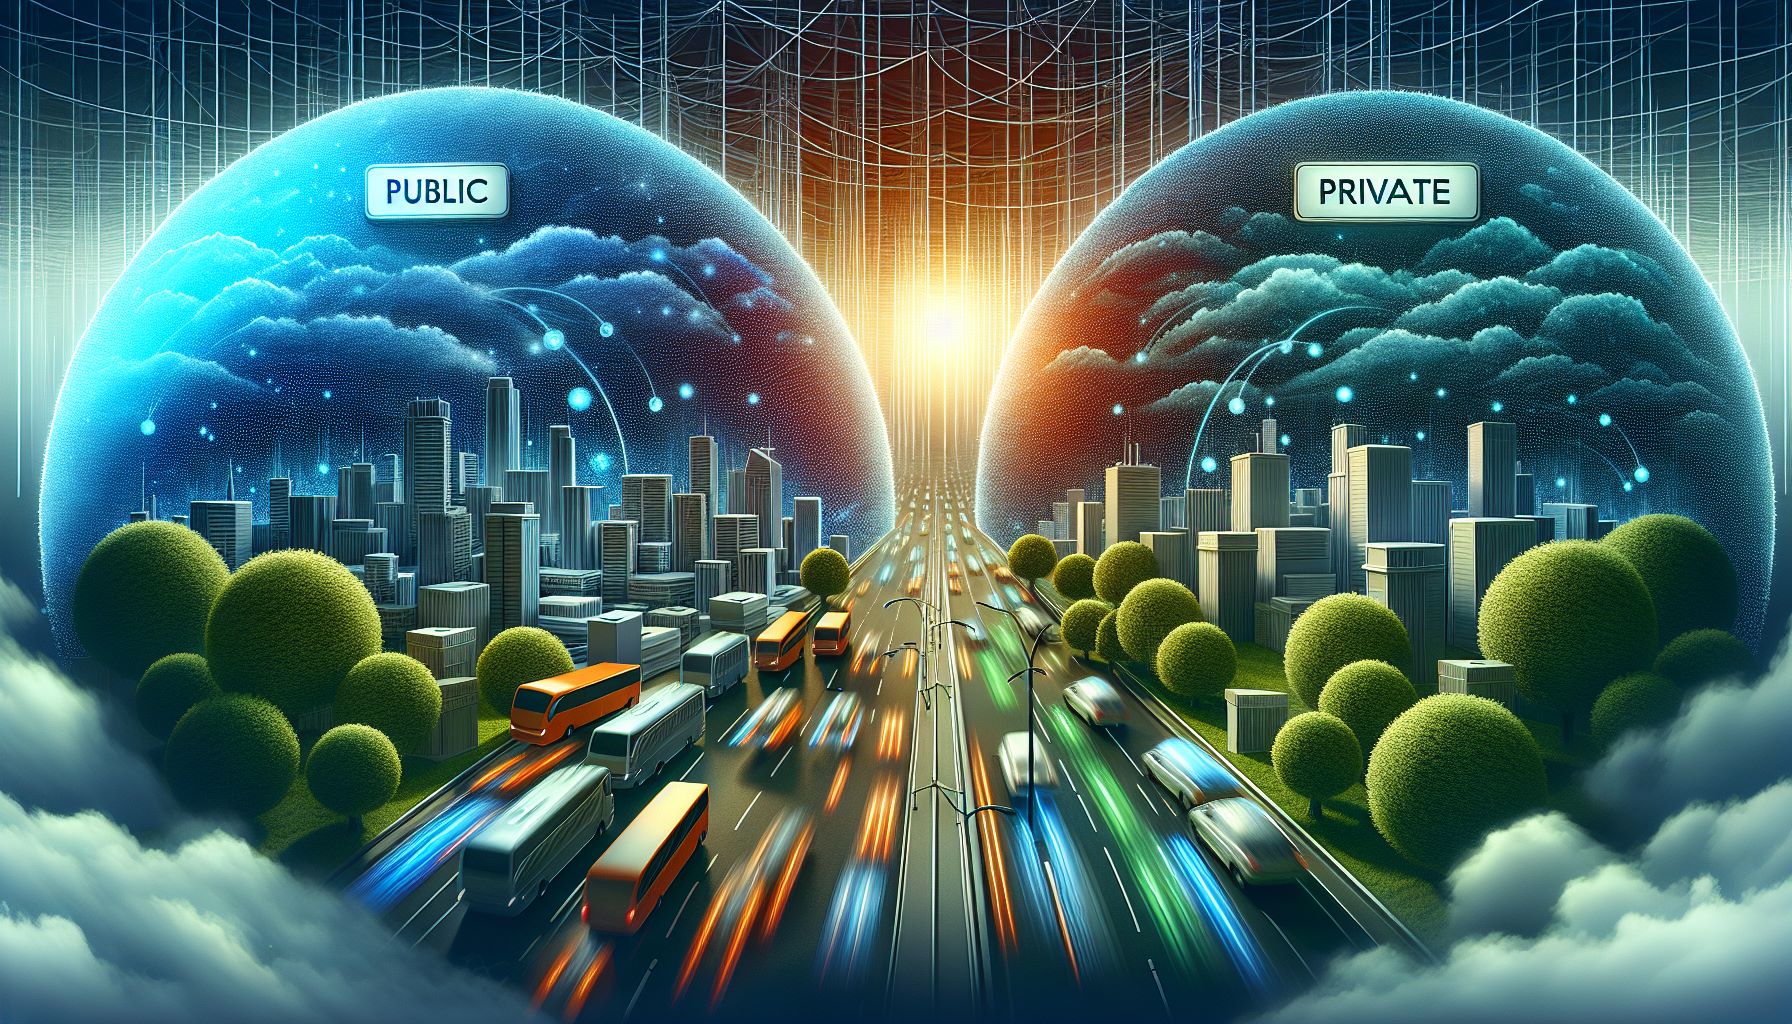 Illustration depicting the contrast between public and private IP addresses